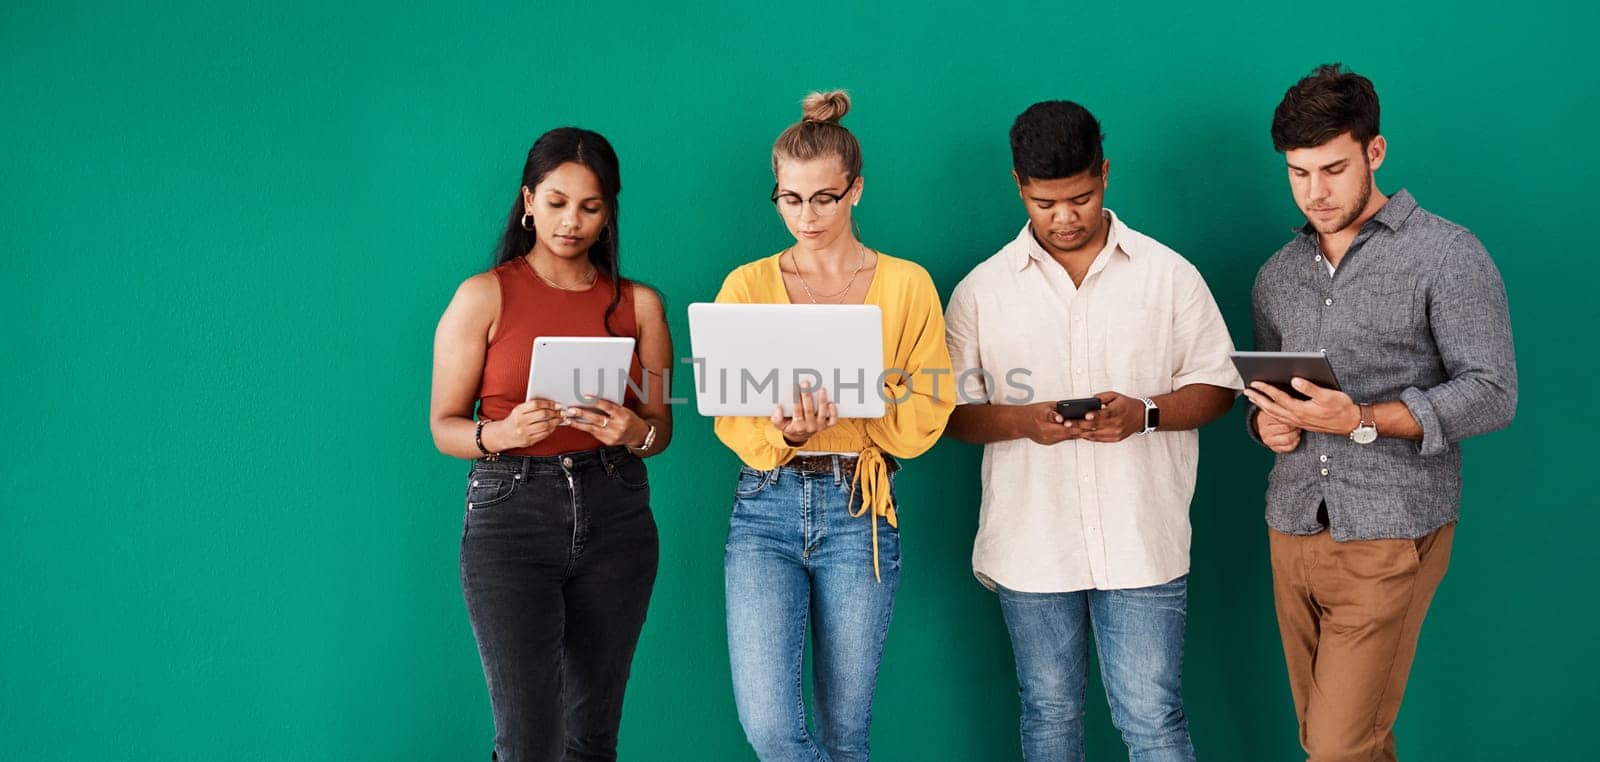 Stay connected to your office with the right business tools. a group of young designers using digital devices while standing together against a green background